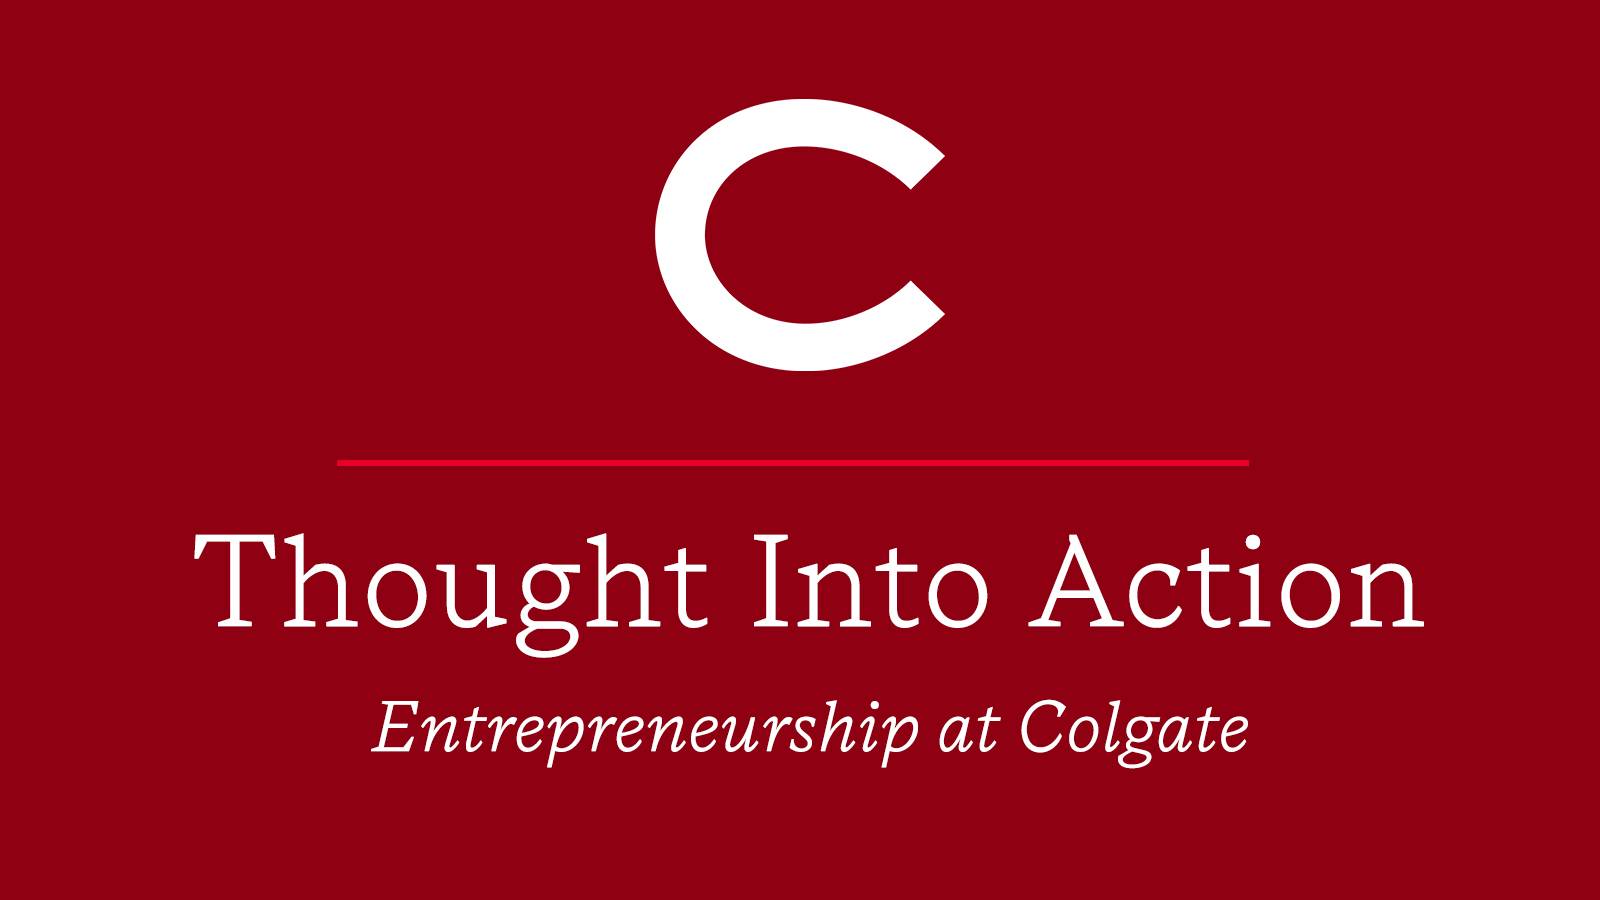 "Thought Into Action: Entrepreneurship at Colgate" on a red background under the Colgate logo